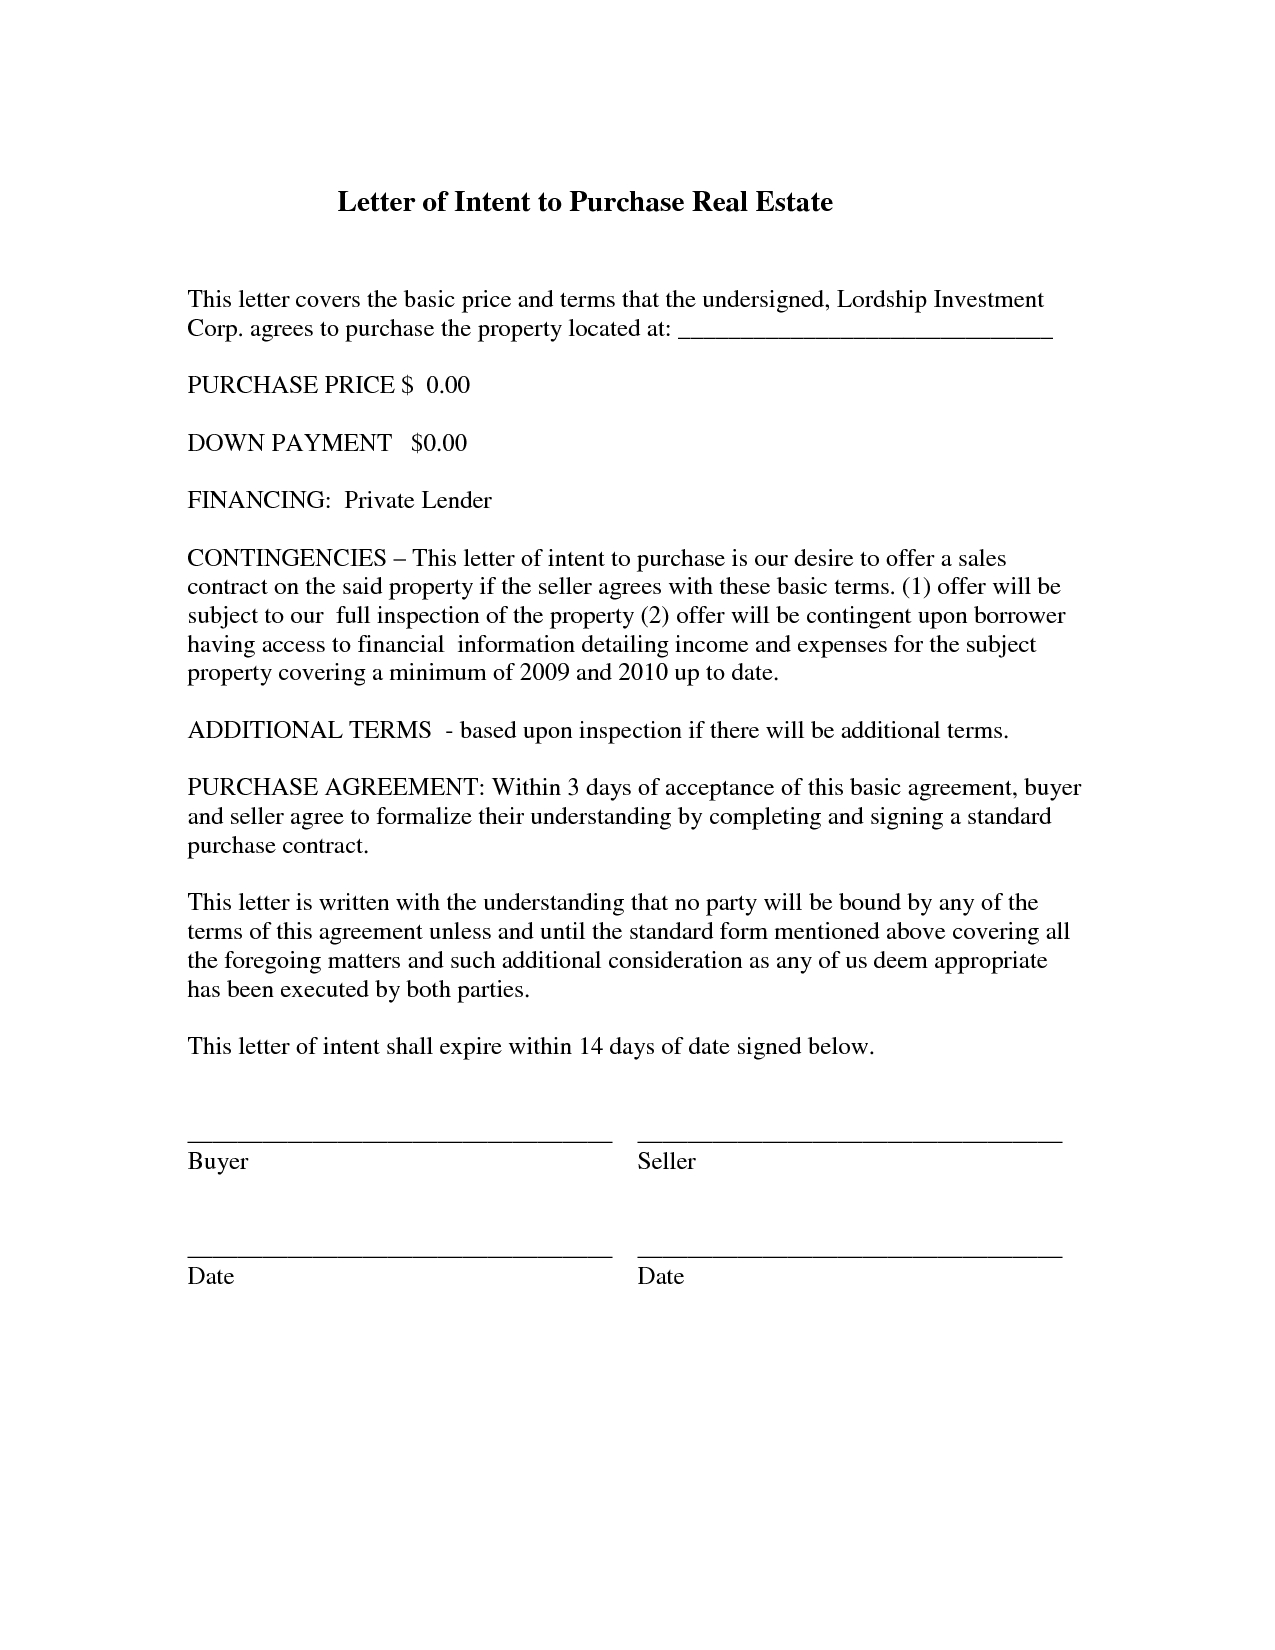 Sample letter of intent to purchase real estate - Letter of Intent Within Real Estate Offer Letter Template